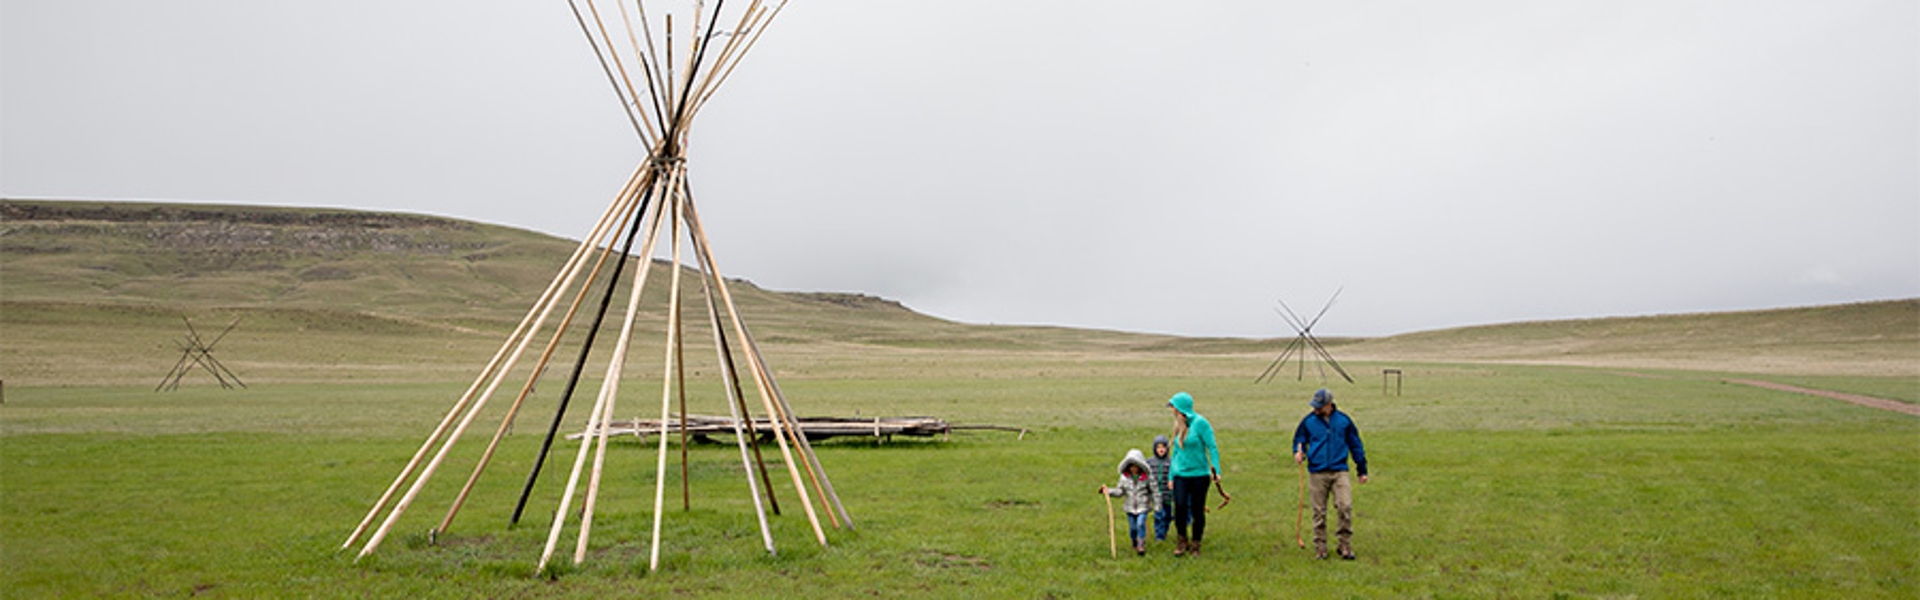 First Peoples visitors and tipi